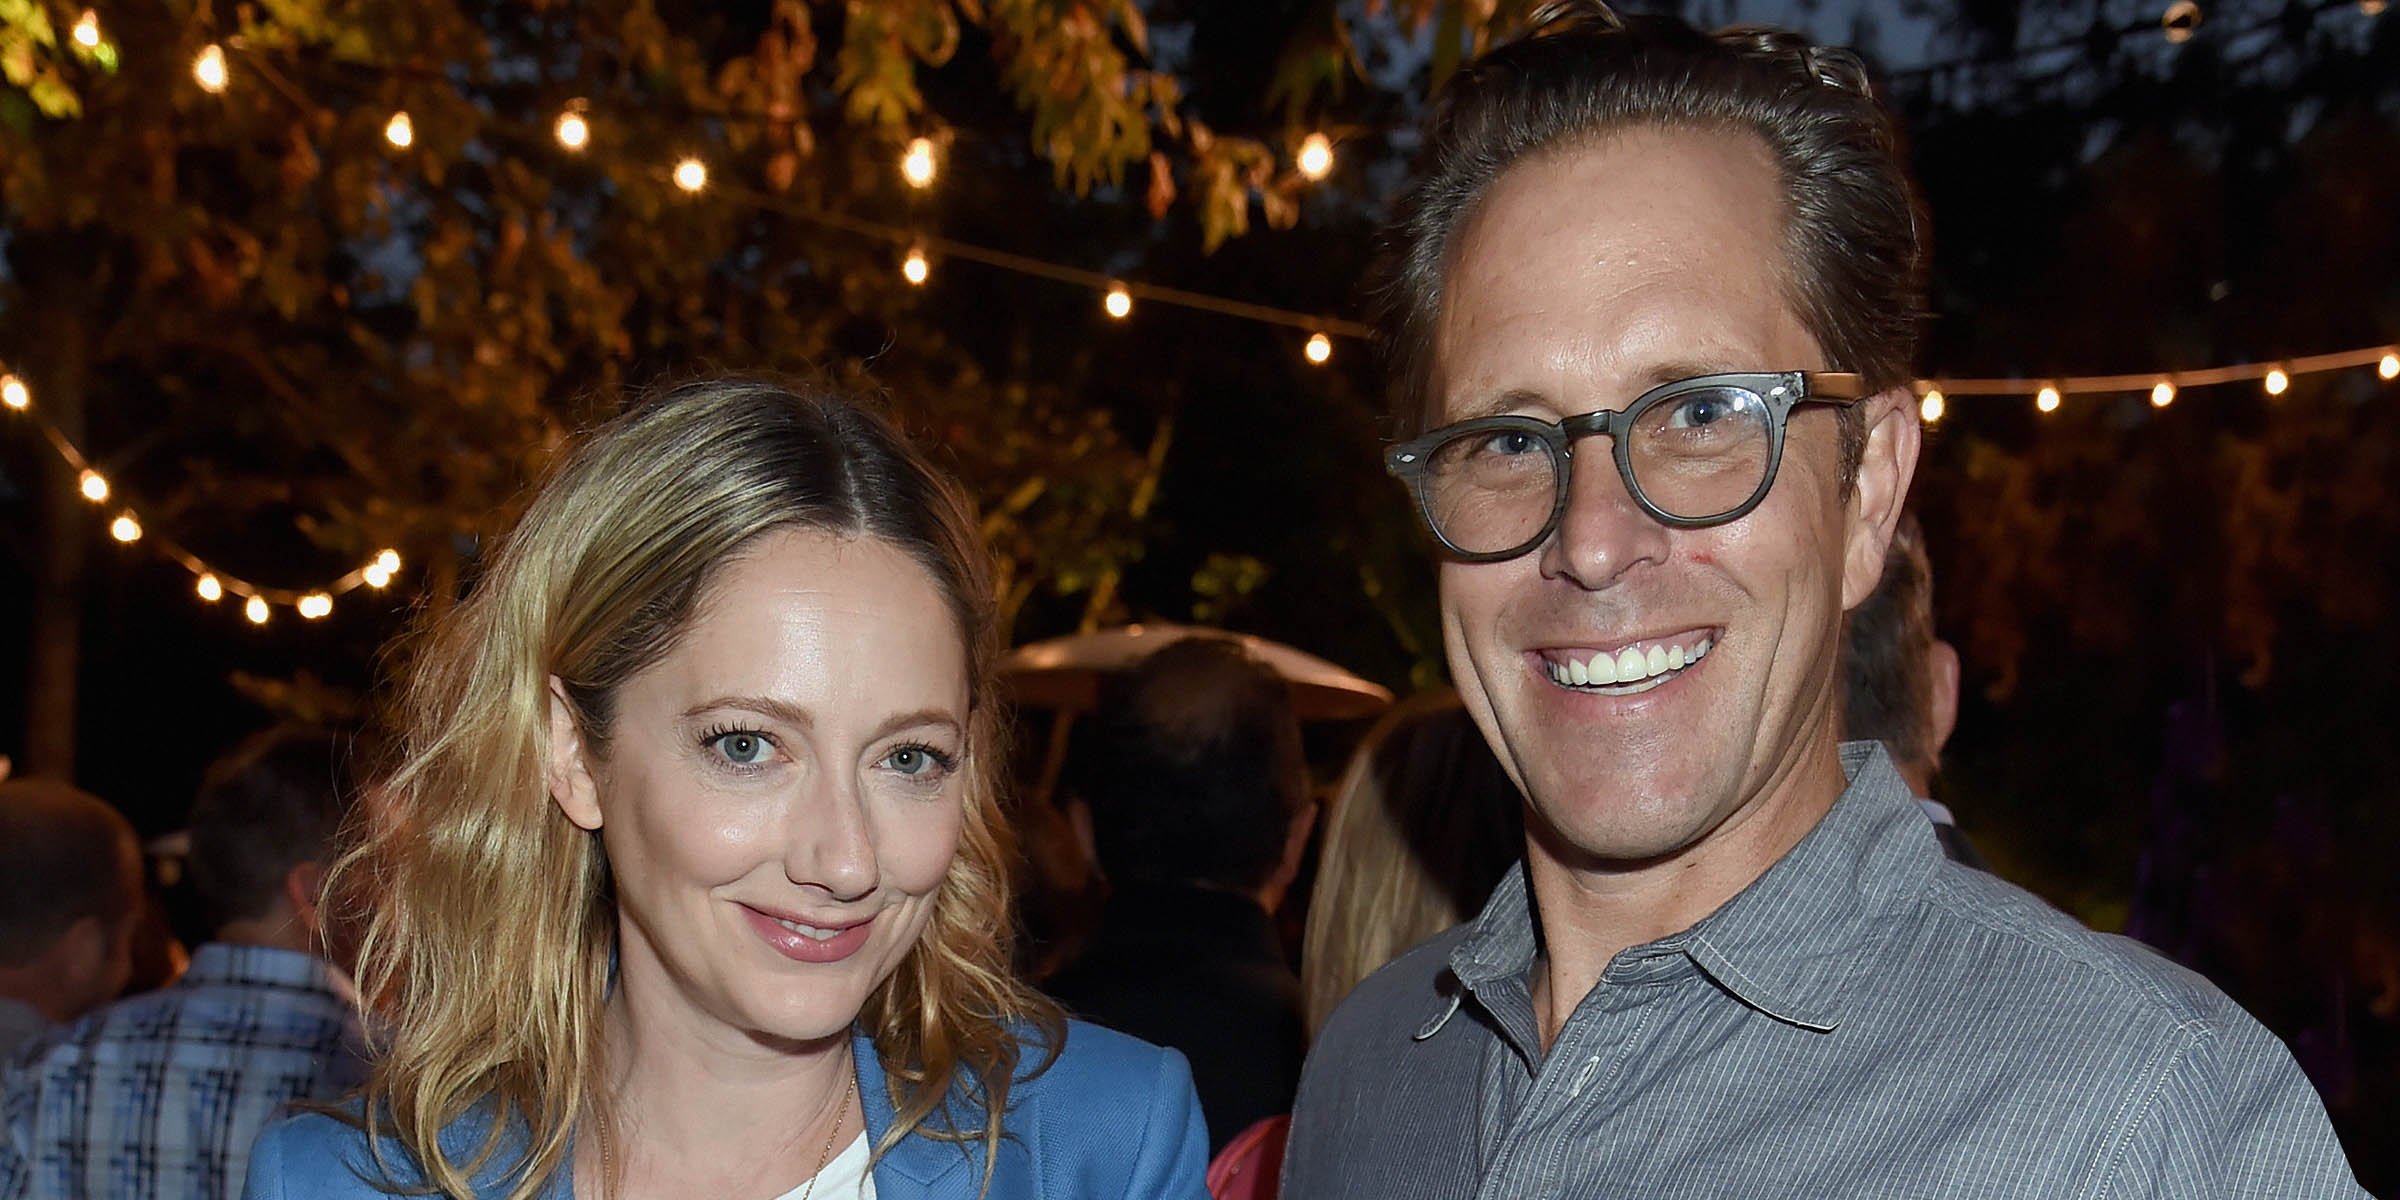 Judy Greer and Dean E. Johnsen | Source: Getty Images